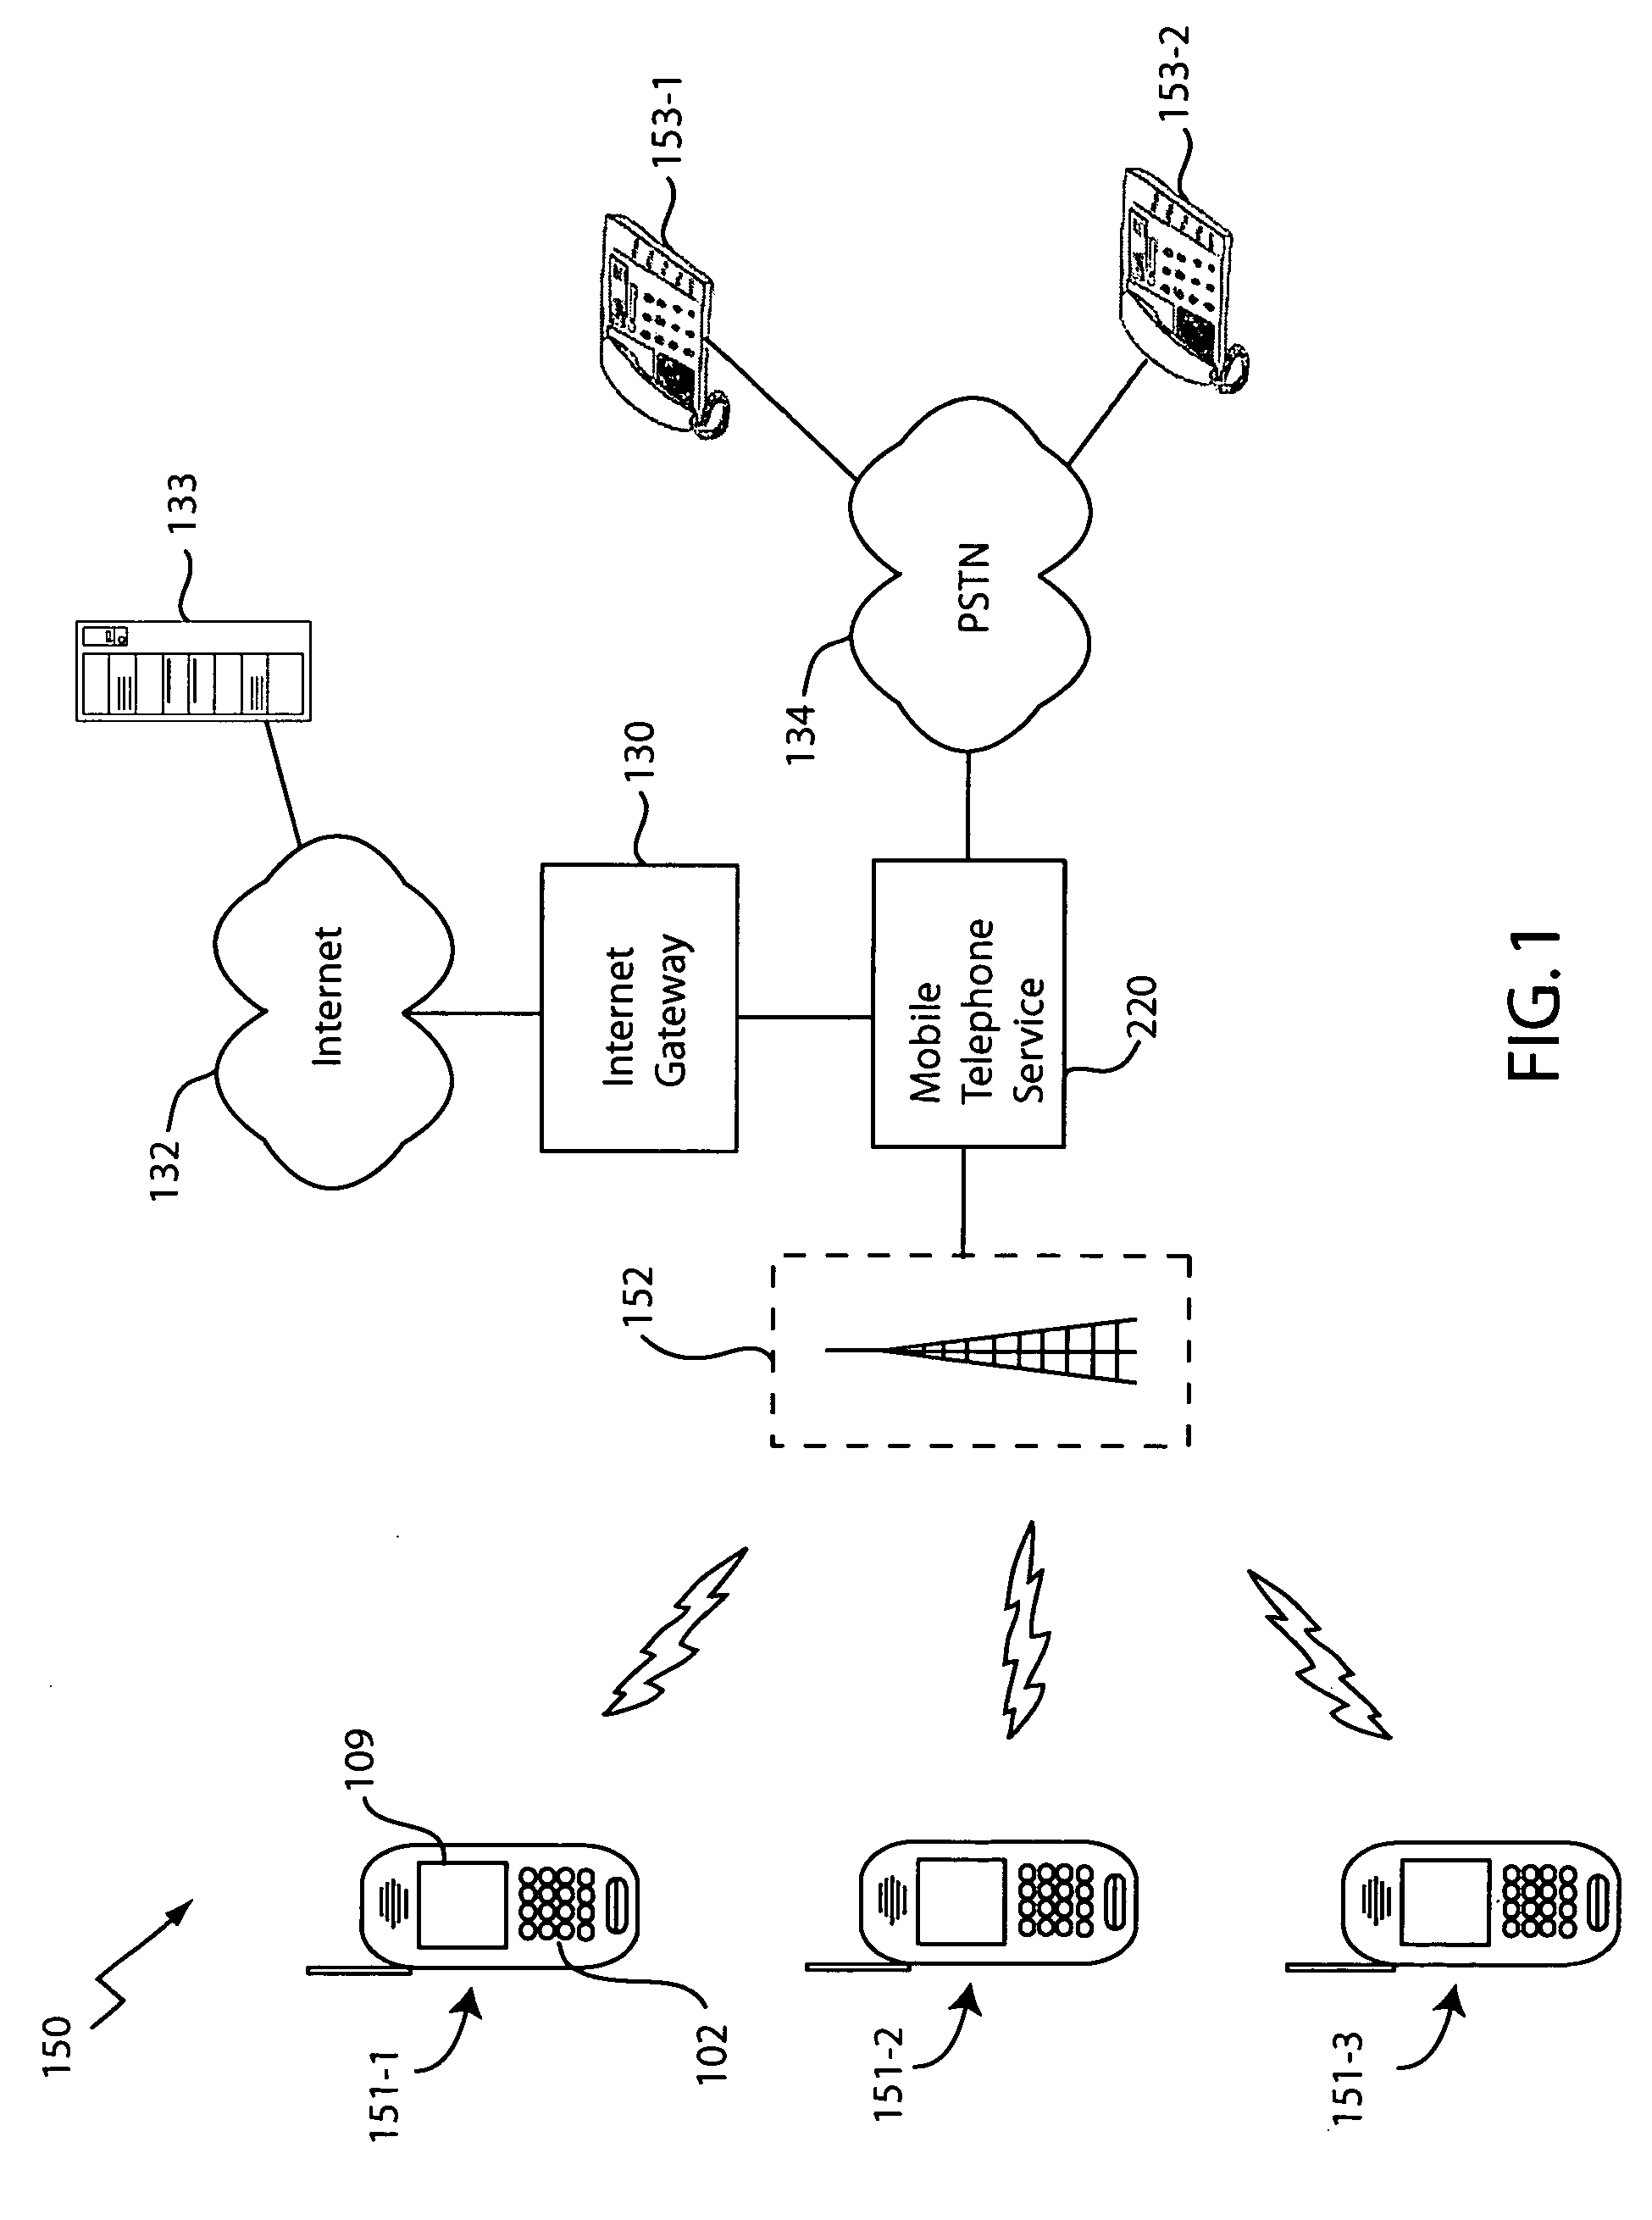 Method and apparatus for performing antivirus tasks in a mobile wireless device